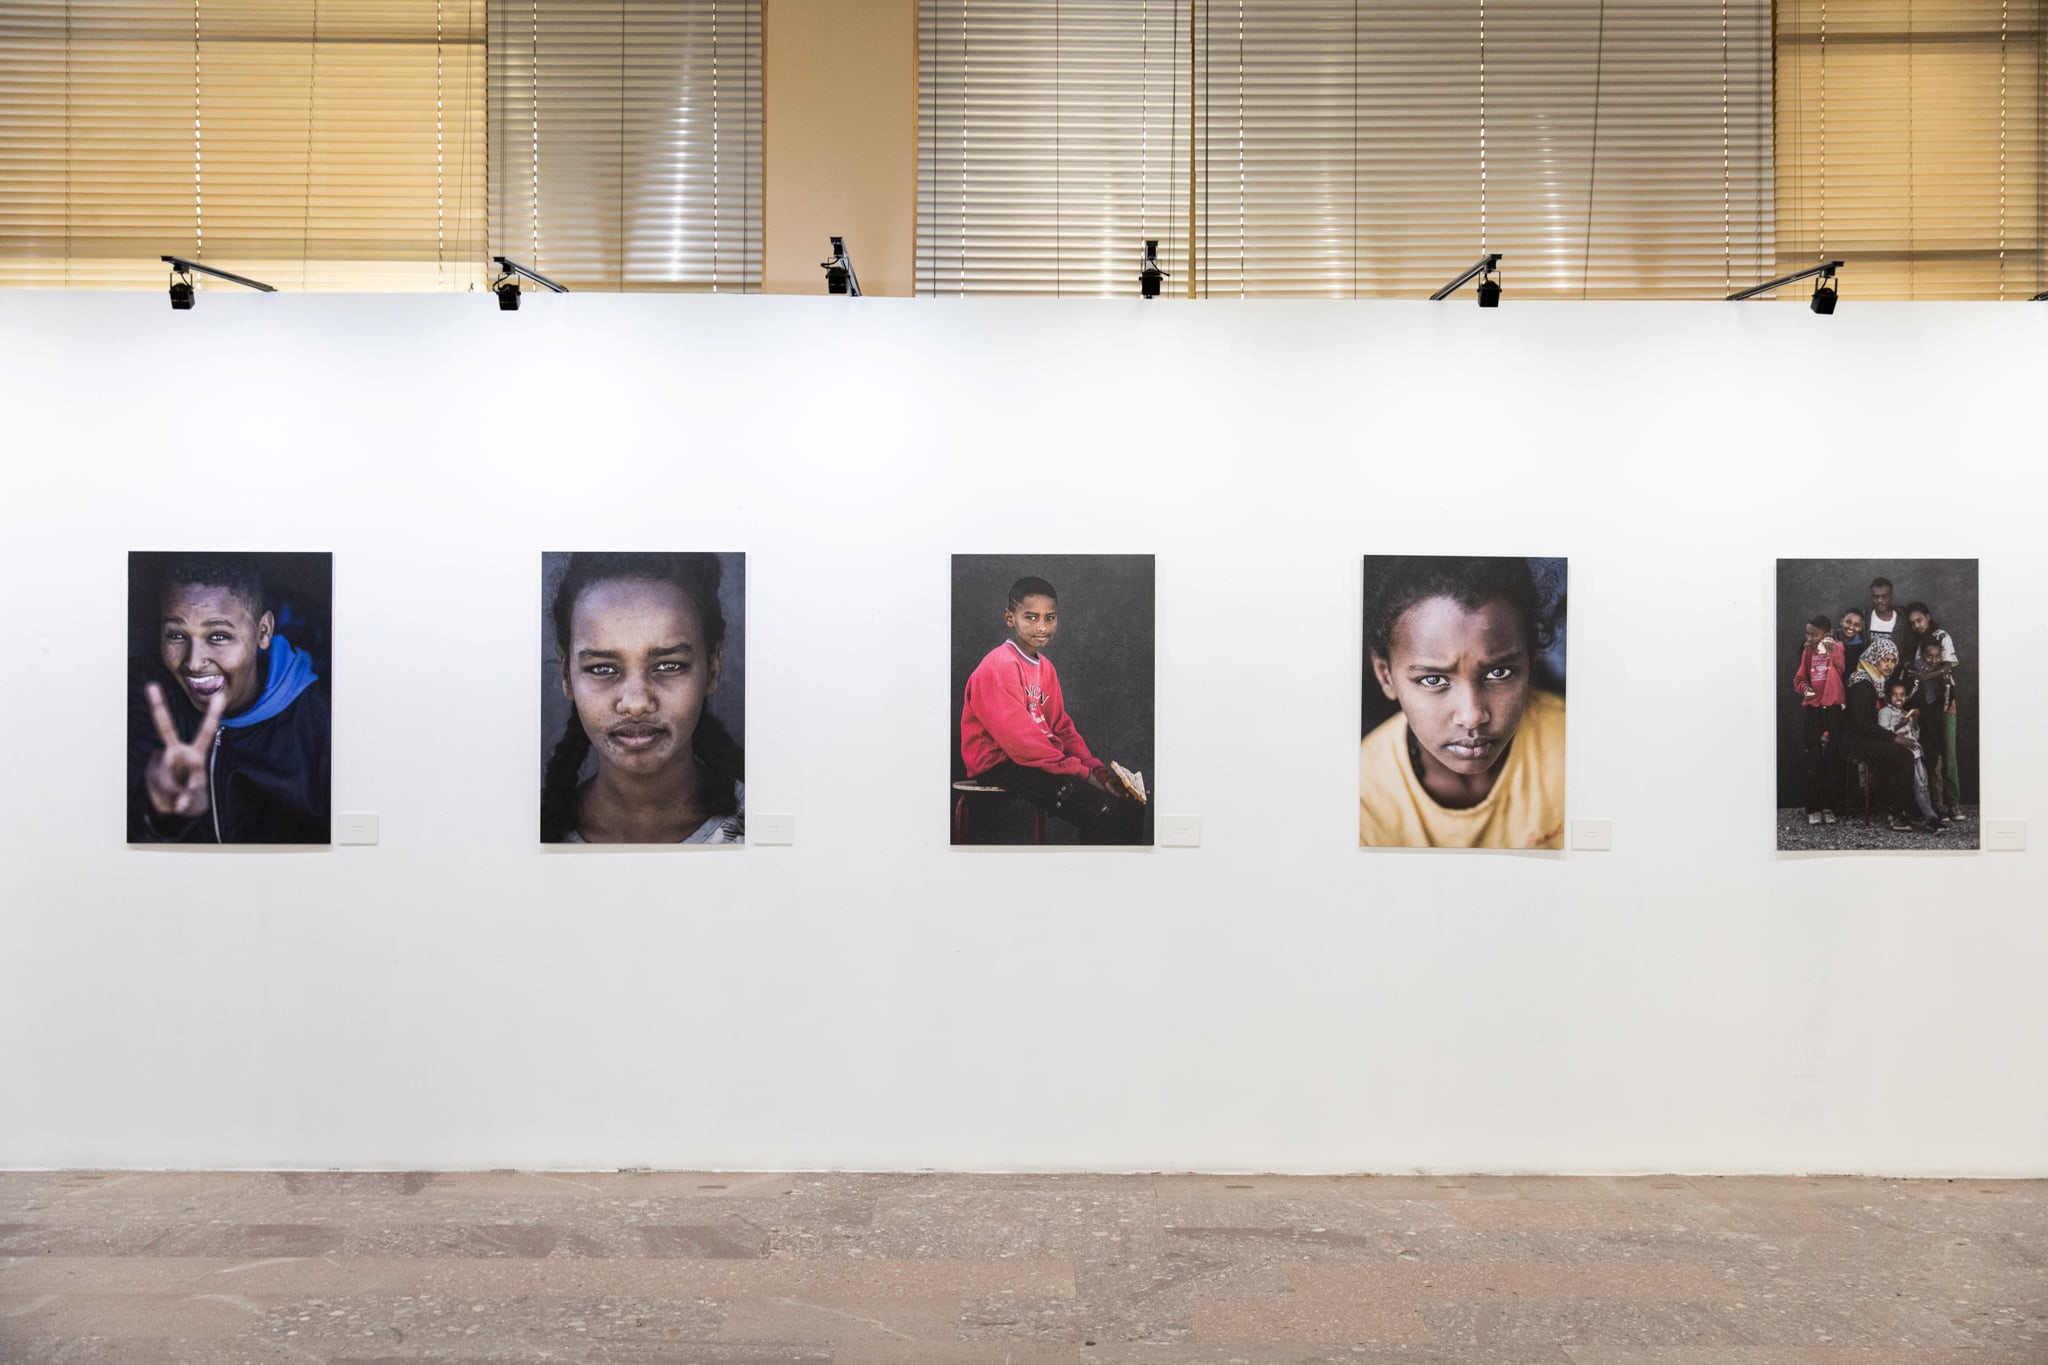 The Dreams We Carry: Refugees and their stories in an exhibition in Tirana